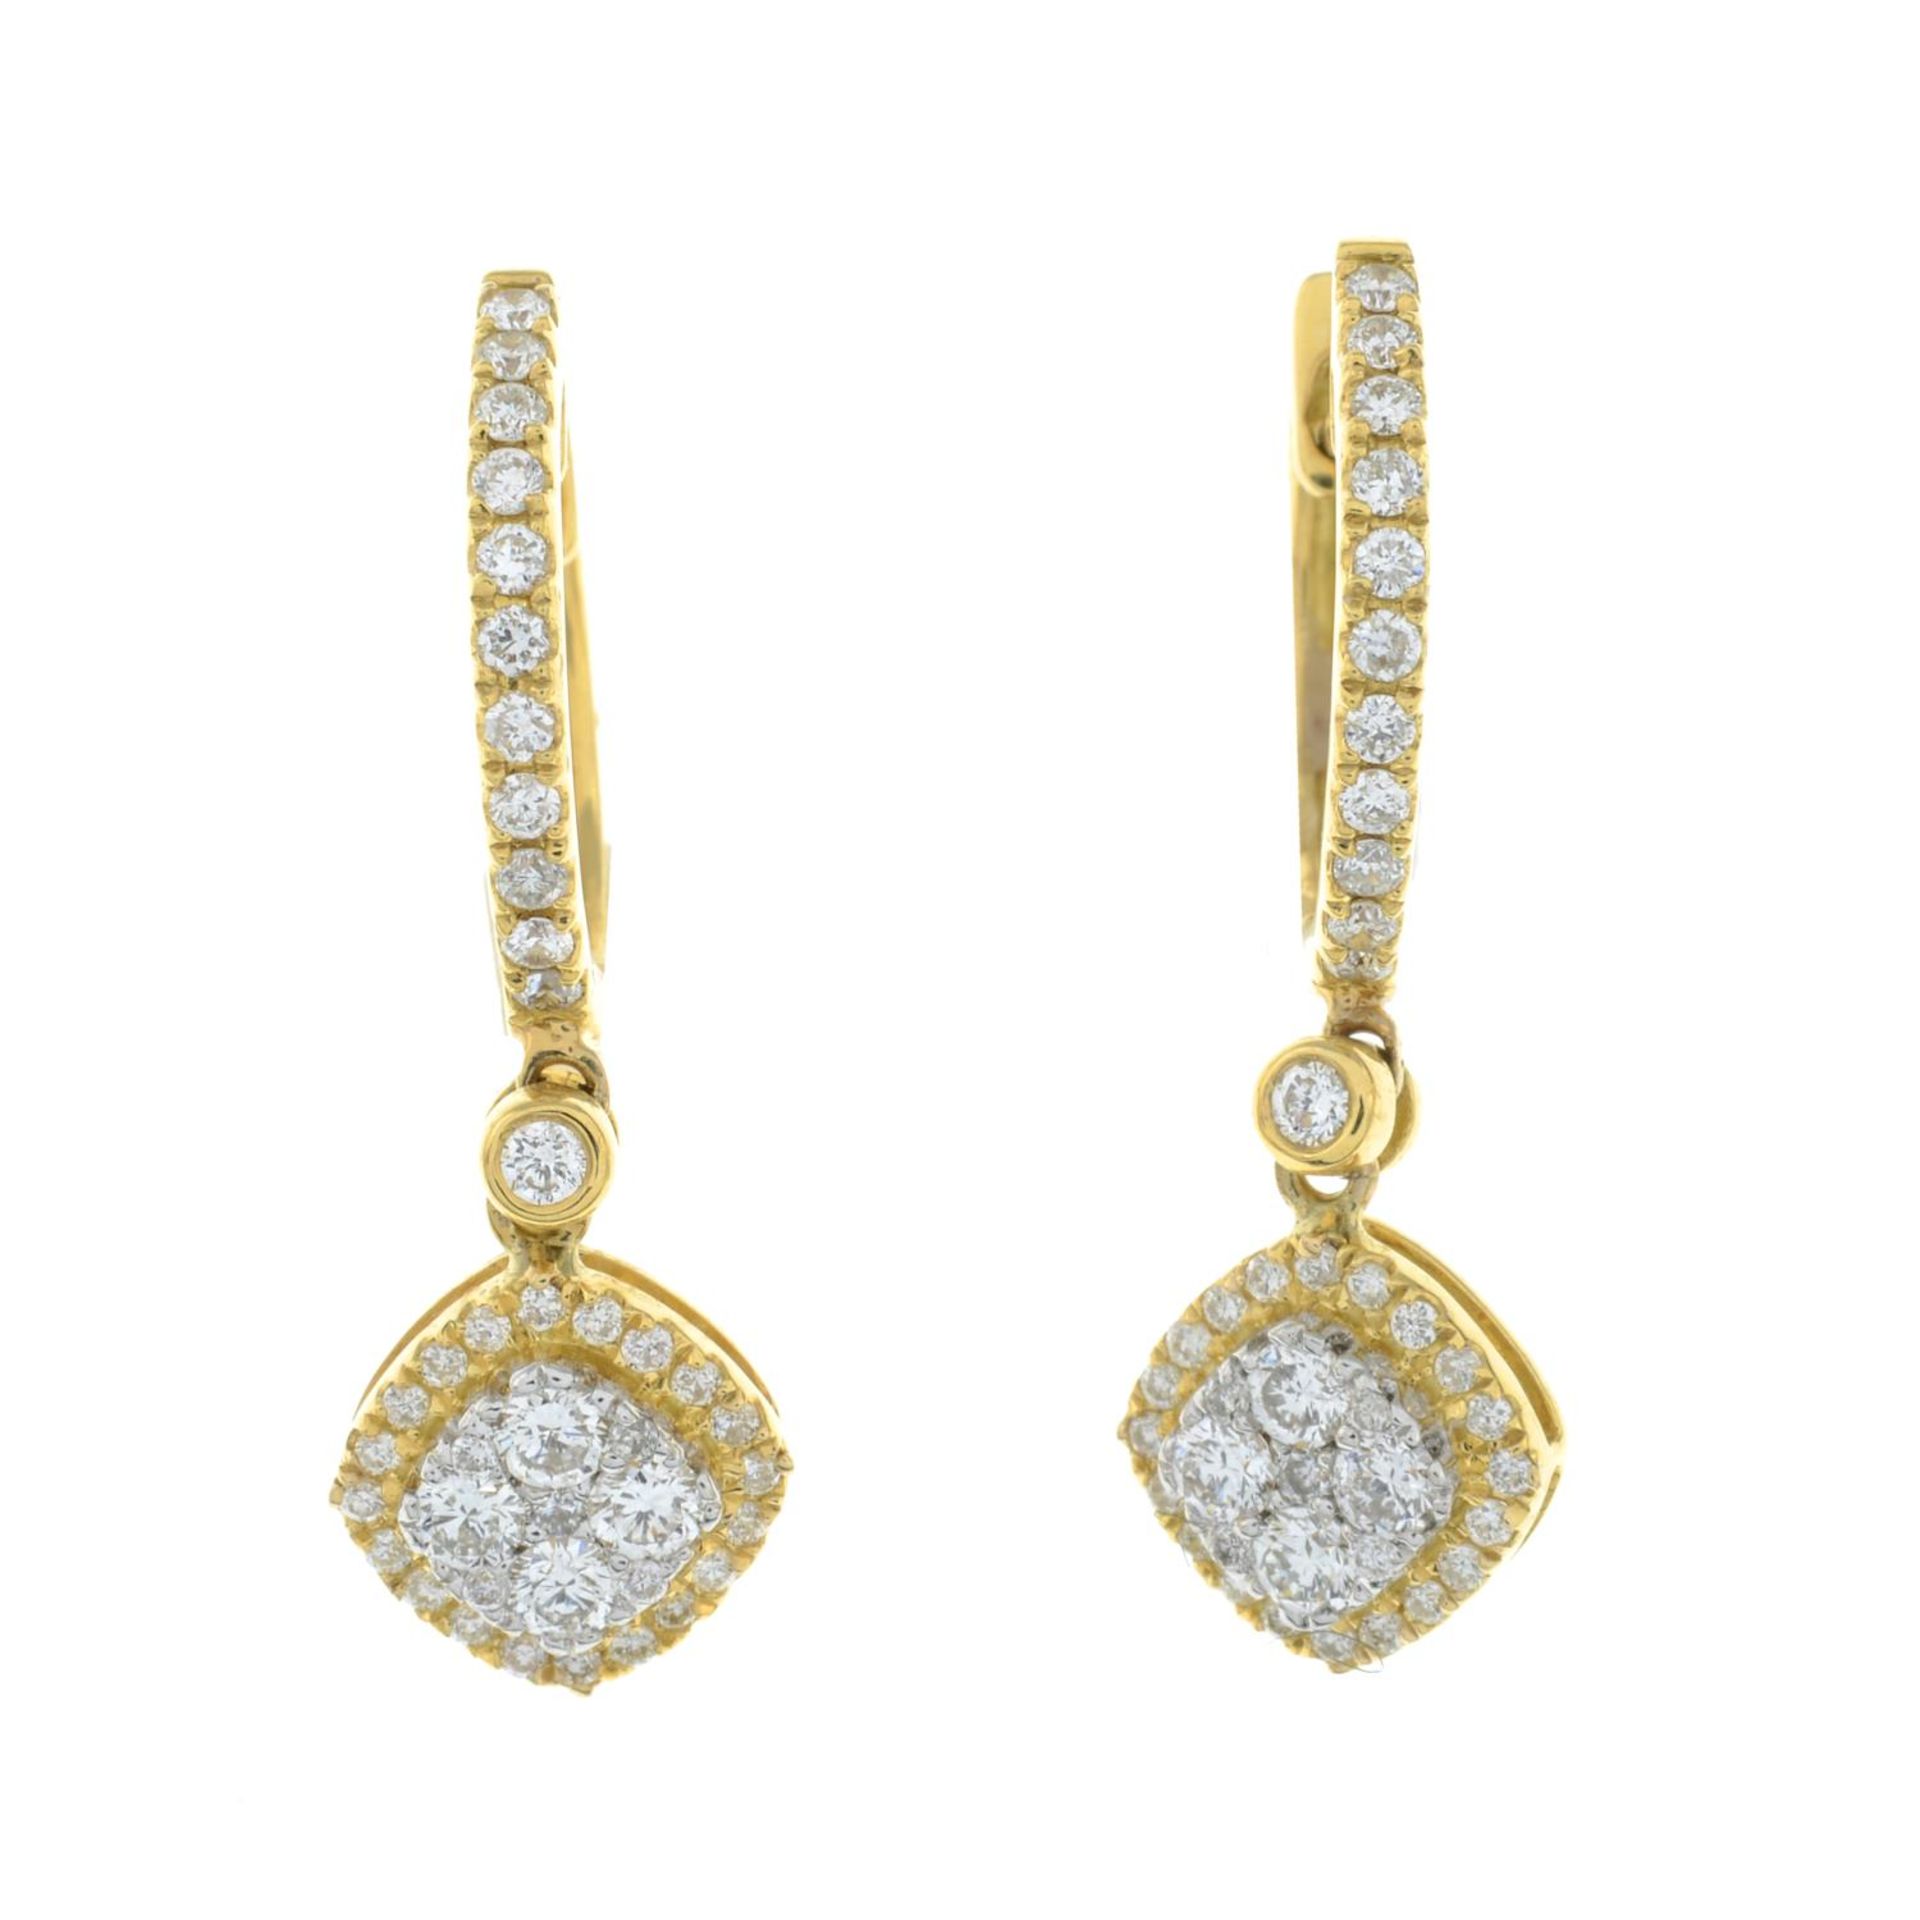 A pair of 18ct gold brilliant-cut diamond earrings.Total diamond weight 0.58ct,